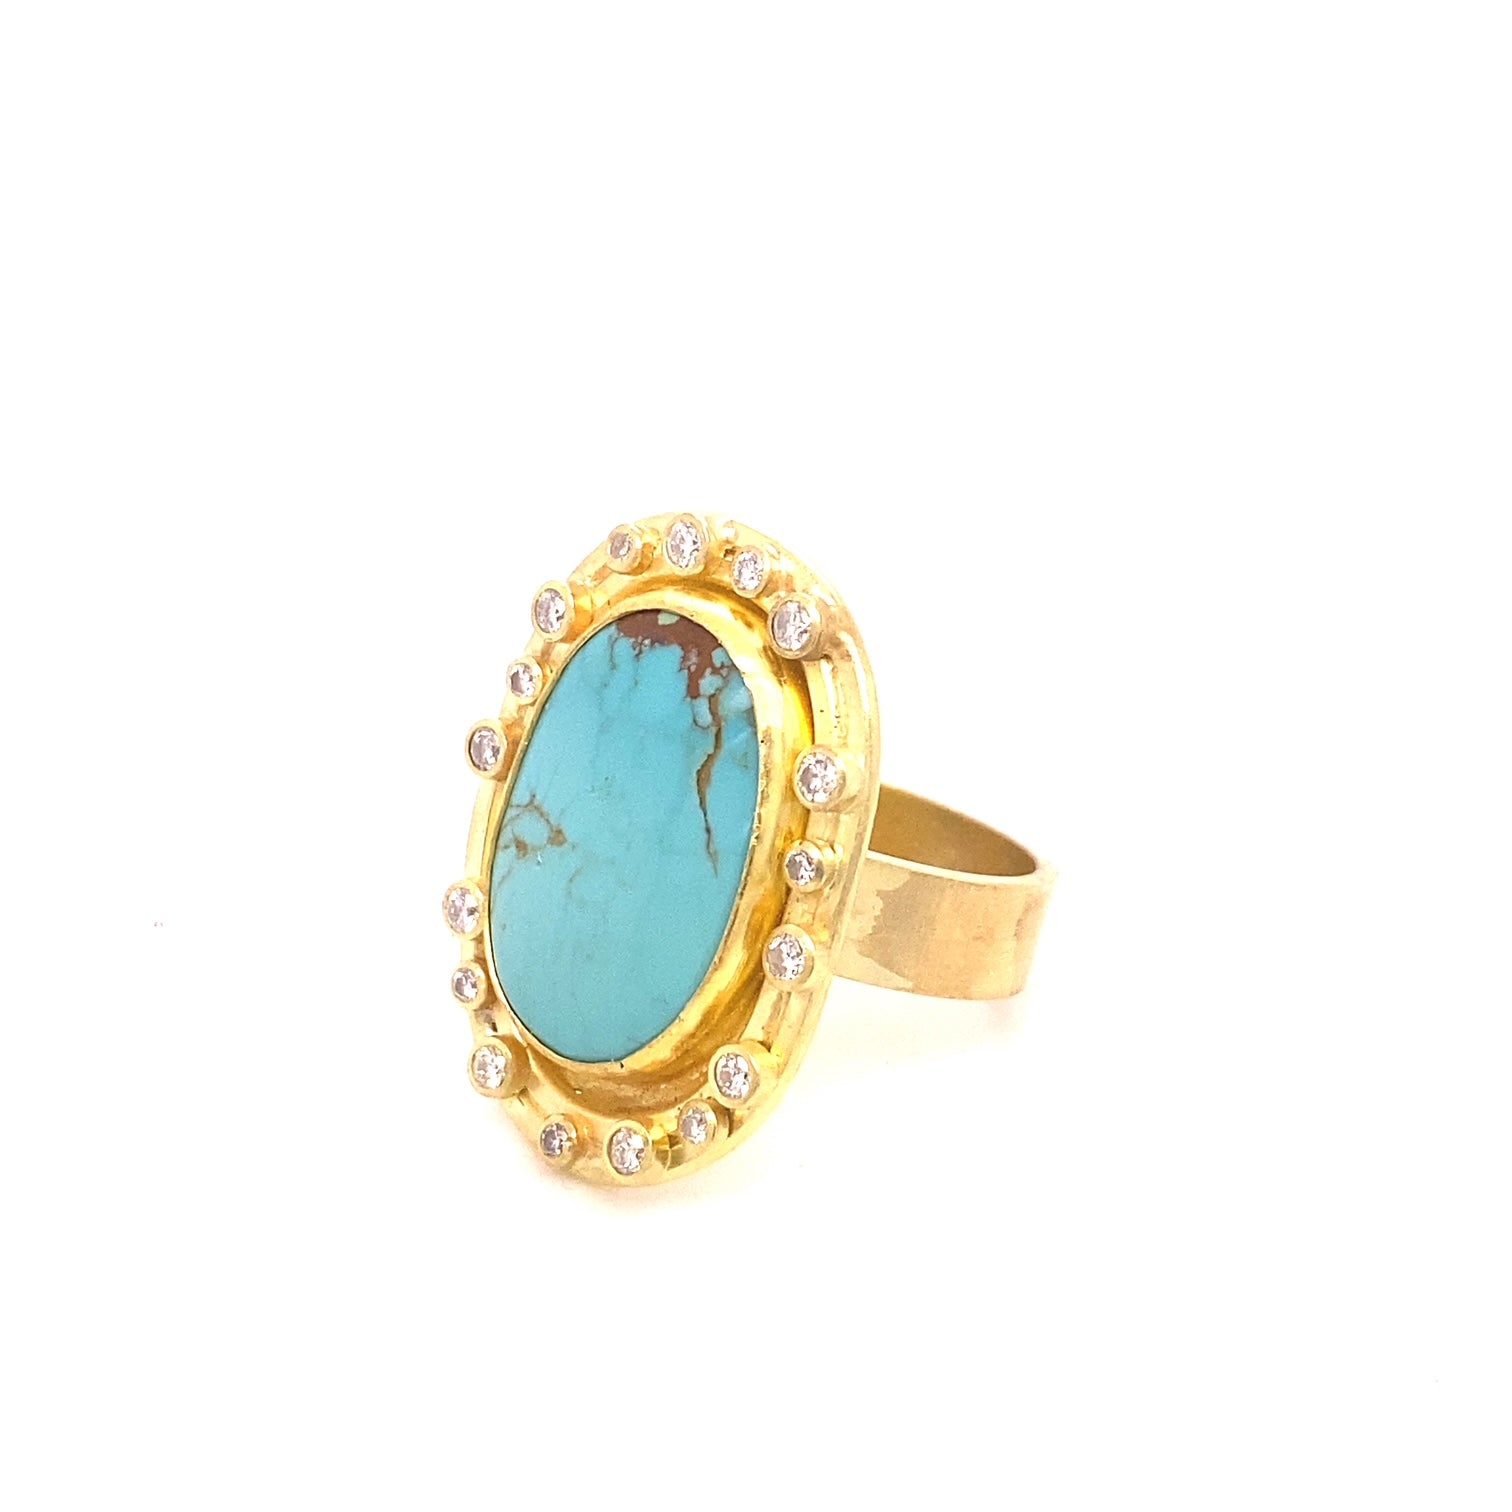 Turquoise and diamond statement ring